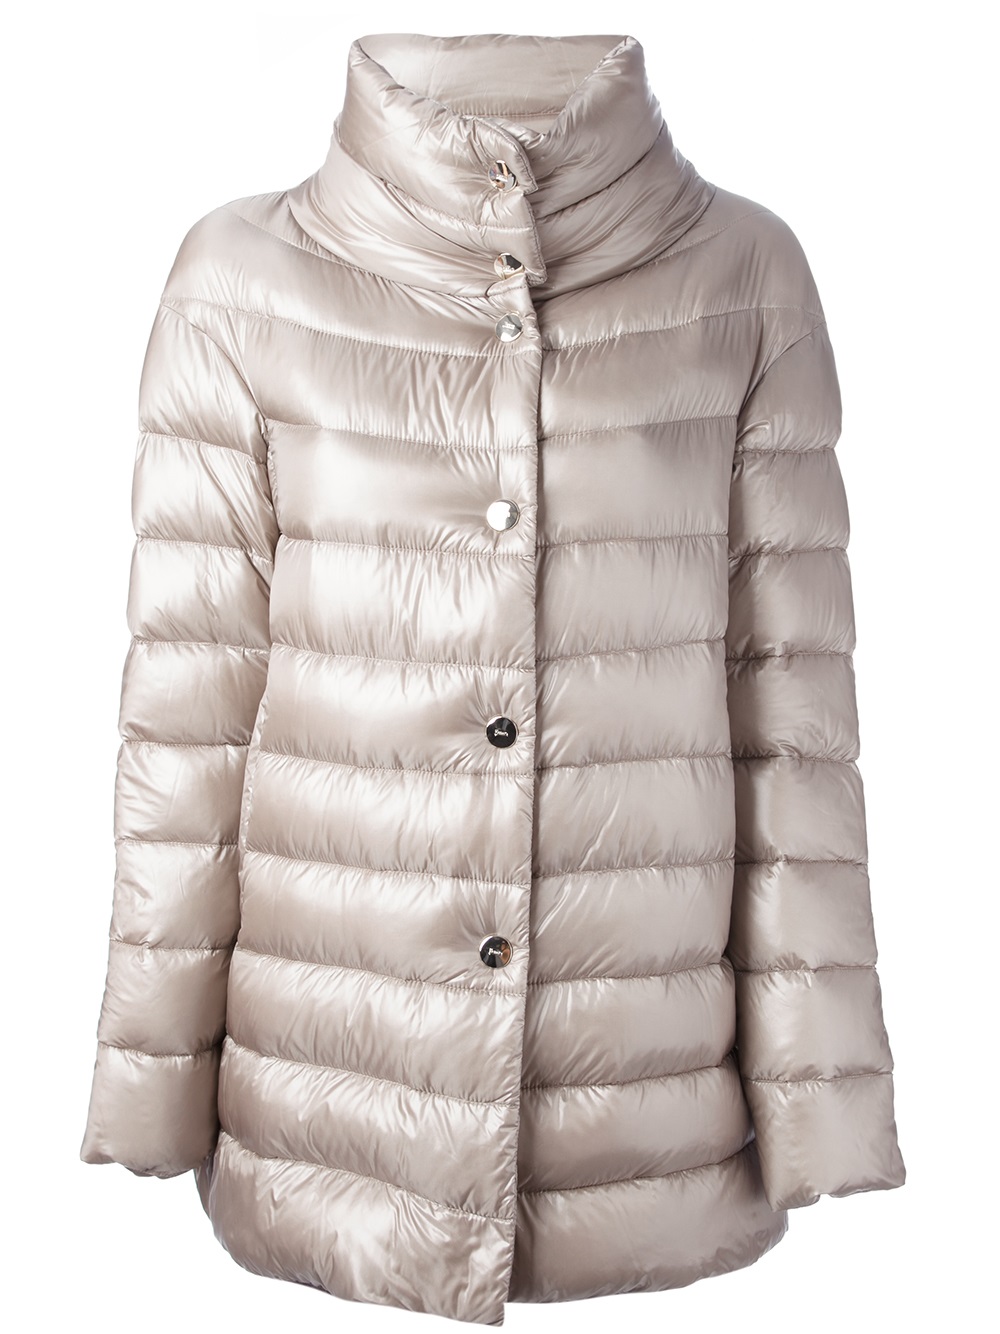 Lyst - Herno Padded Jacket in Natural